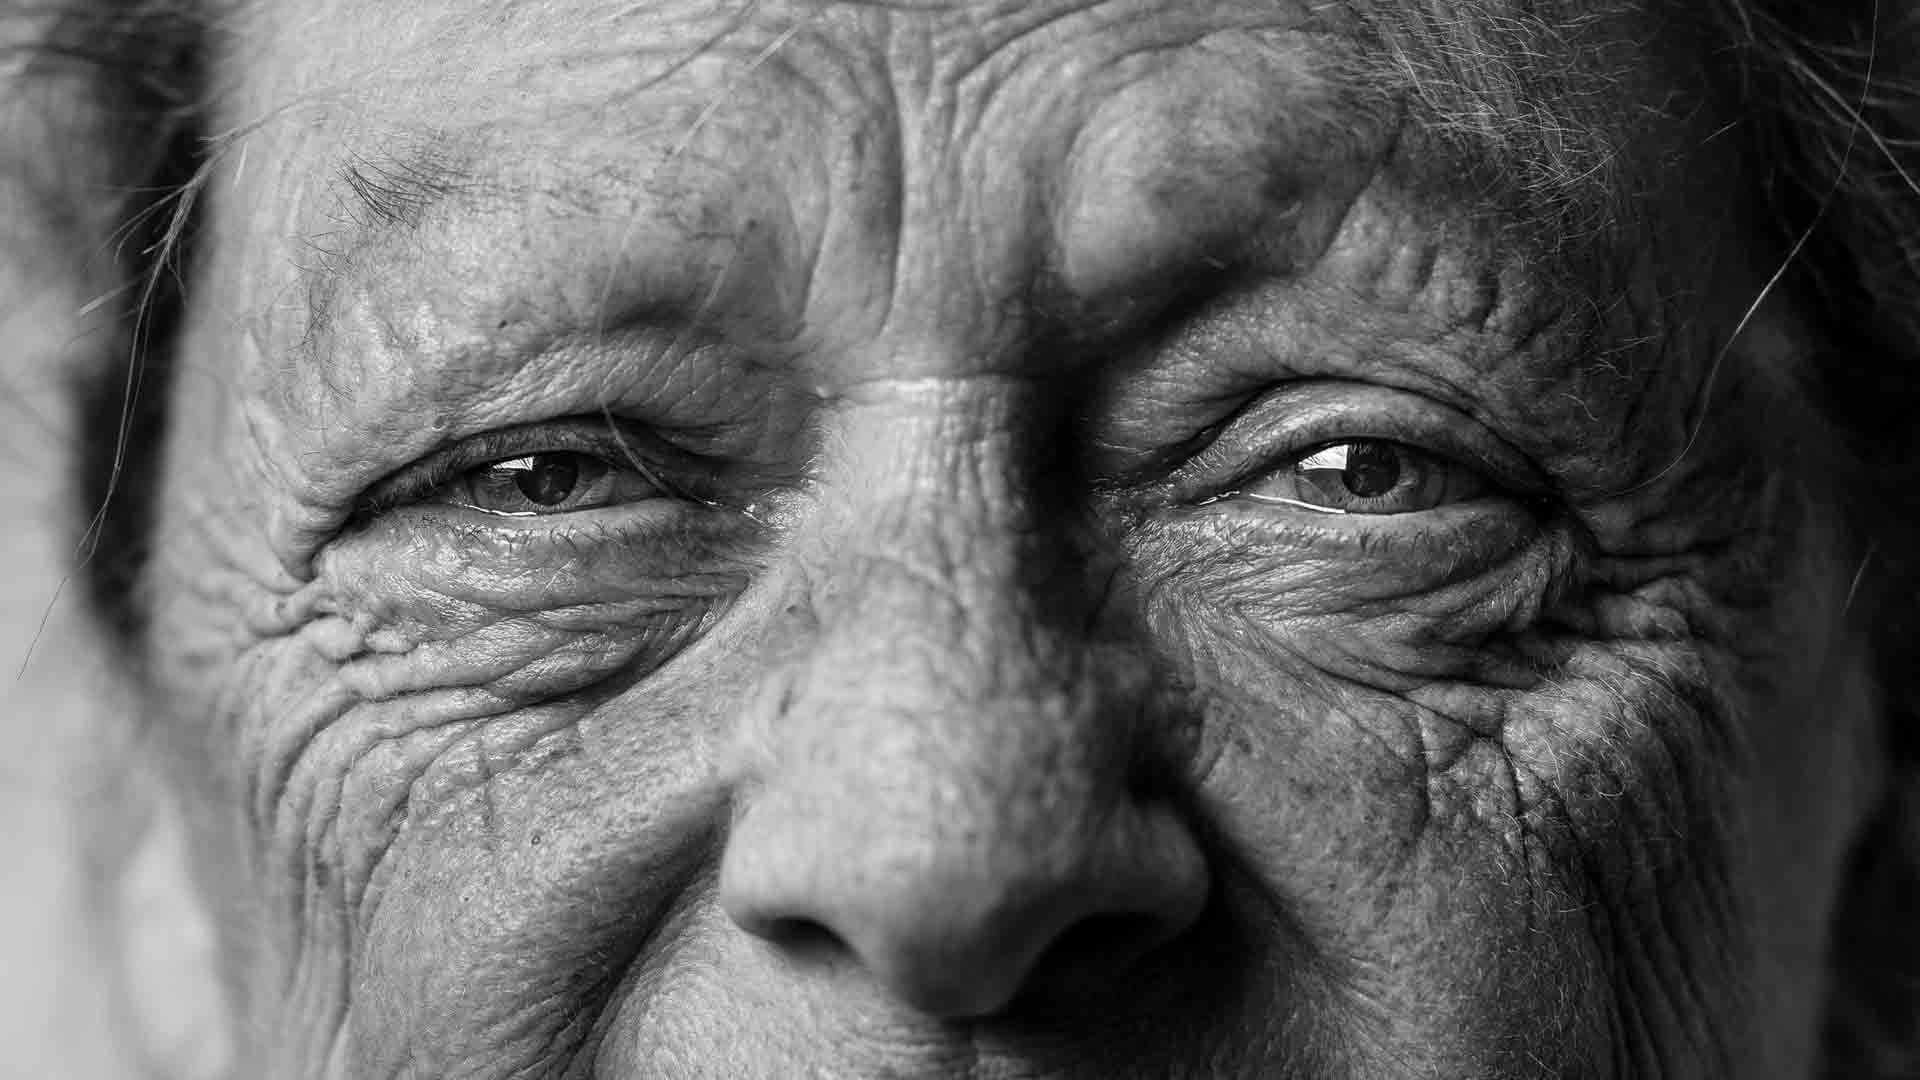 How to use depth of field to draw attention to a subject - old man close up portrait